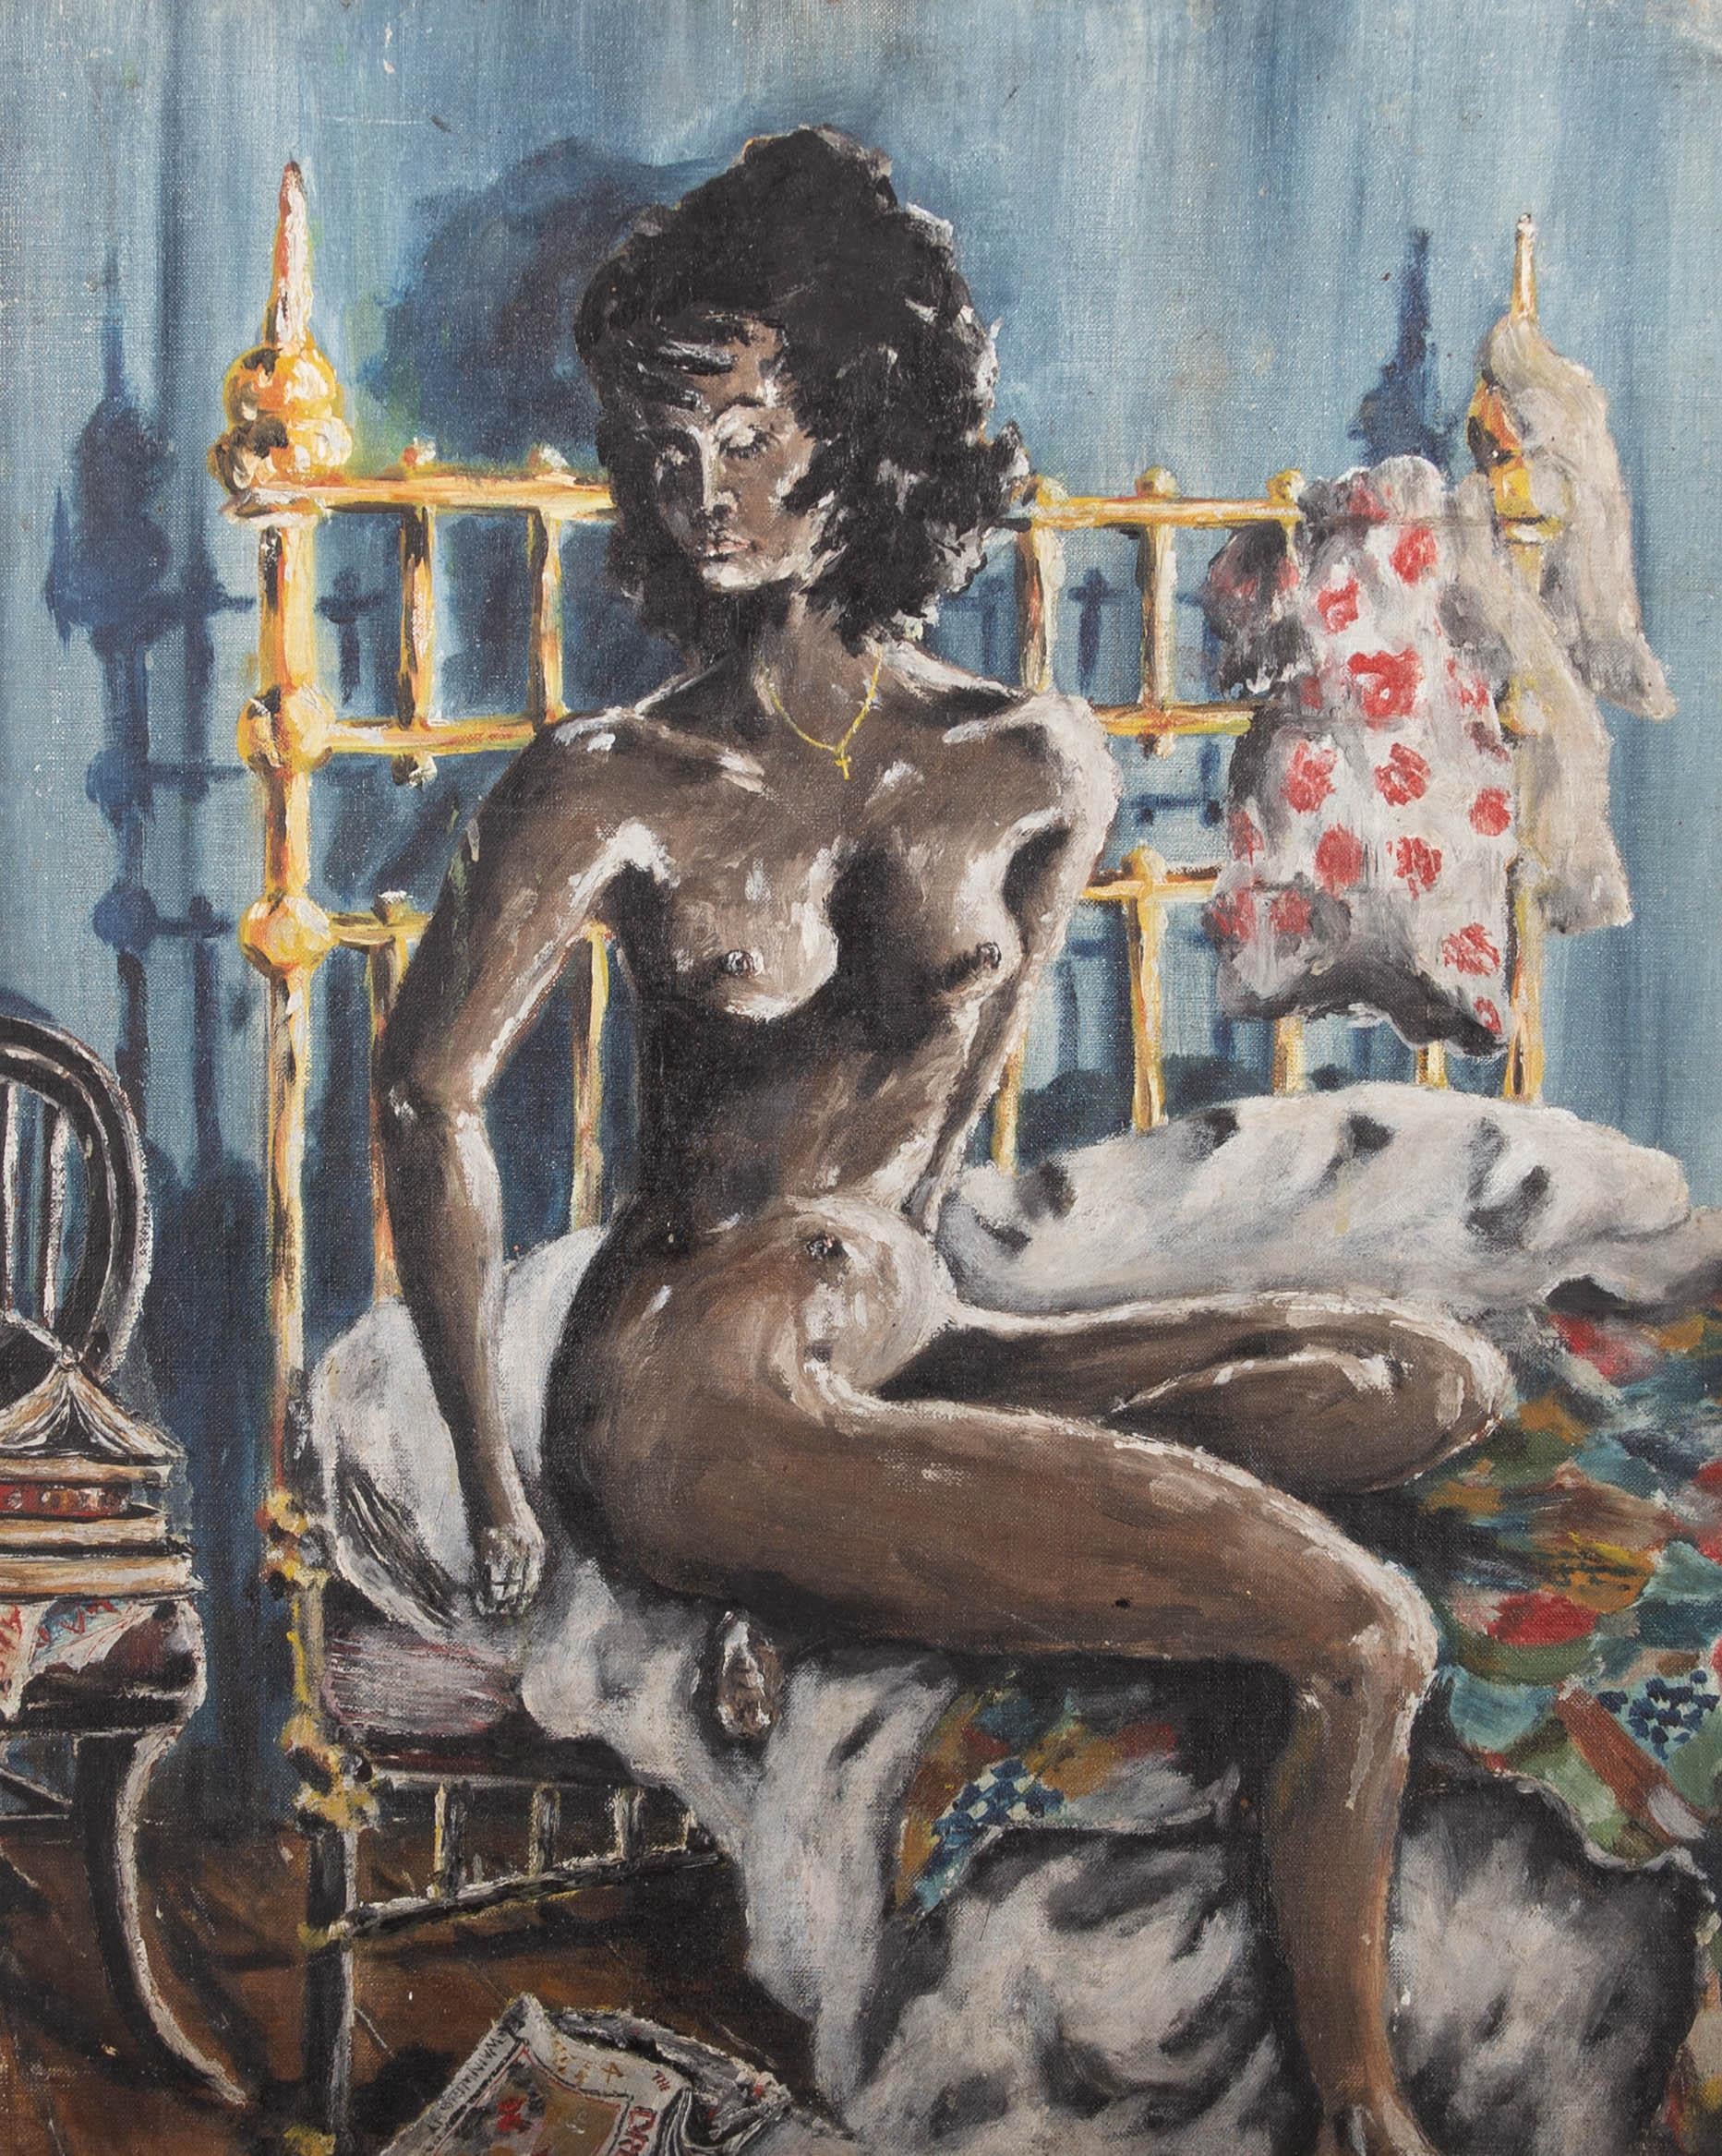 Unknown Portrait Painting - Mid 20th Century Oil - Portrait of Nude Female Figure in Bedroom